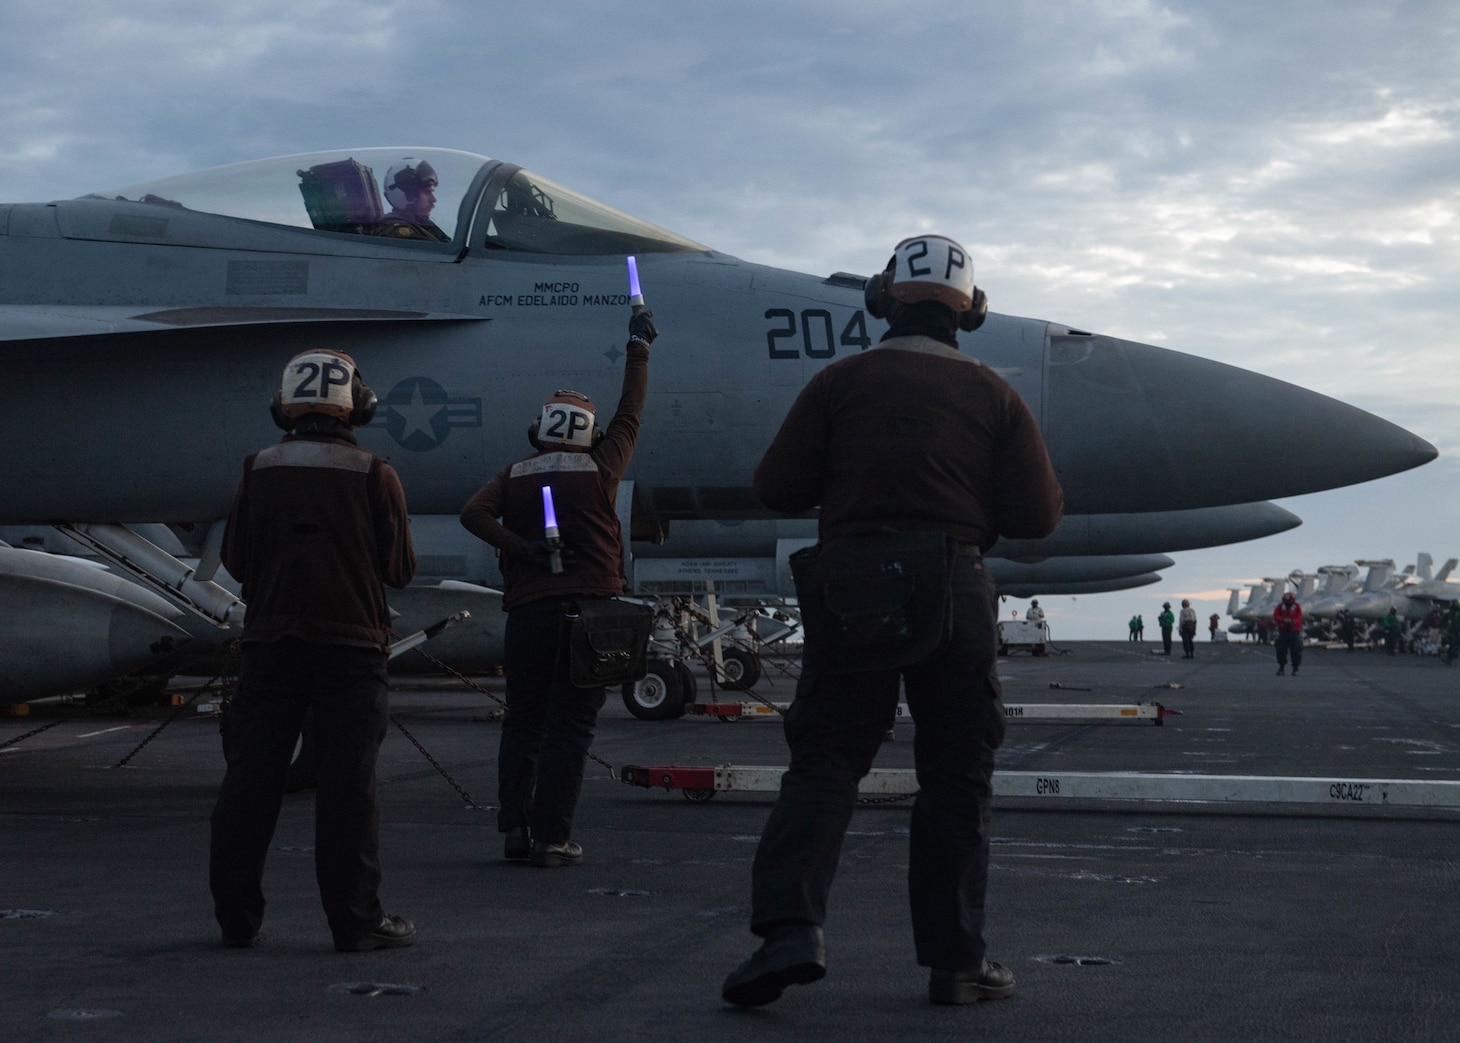 SOUTH CHINA SEA (Feb. 9, 2021) U.S. Sailors signal the pilot of an F/A-18E Super Hornet, assigned to the “Tomcatters” of Strike Fighter Squadron (VFA) 31, while conducting dual-carrier operations with the Nimitz Carrier Strike Group in the South China Sea Feb. 9, 2021. The Theodore Roosevelt and Nimitz Carrier Strike Groups are conducting dual-carrier operations during their deployments to the 7th Fleet area of operations. As the U.S. Navy’s largest forward-deployed fleet, 7th Fleet routinely operates and interacts with 35 maritime nations while conducting missions to preserve and protect a free and open Indo-Pacific region. (U.S. Navy photo by Mass Communication Specialist 2nd Class Zachary Wheeler)